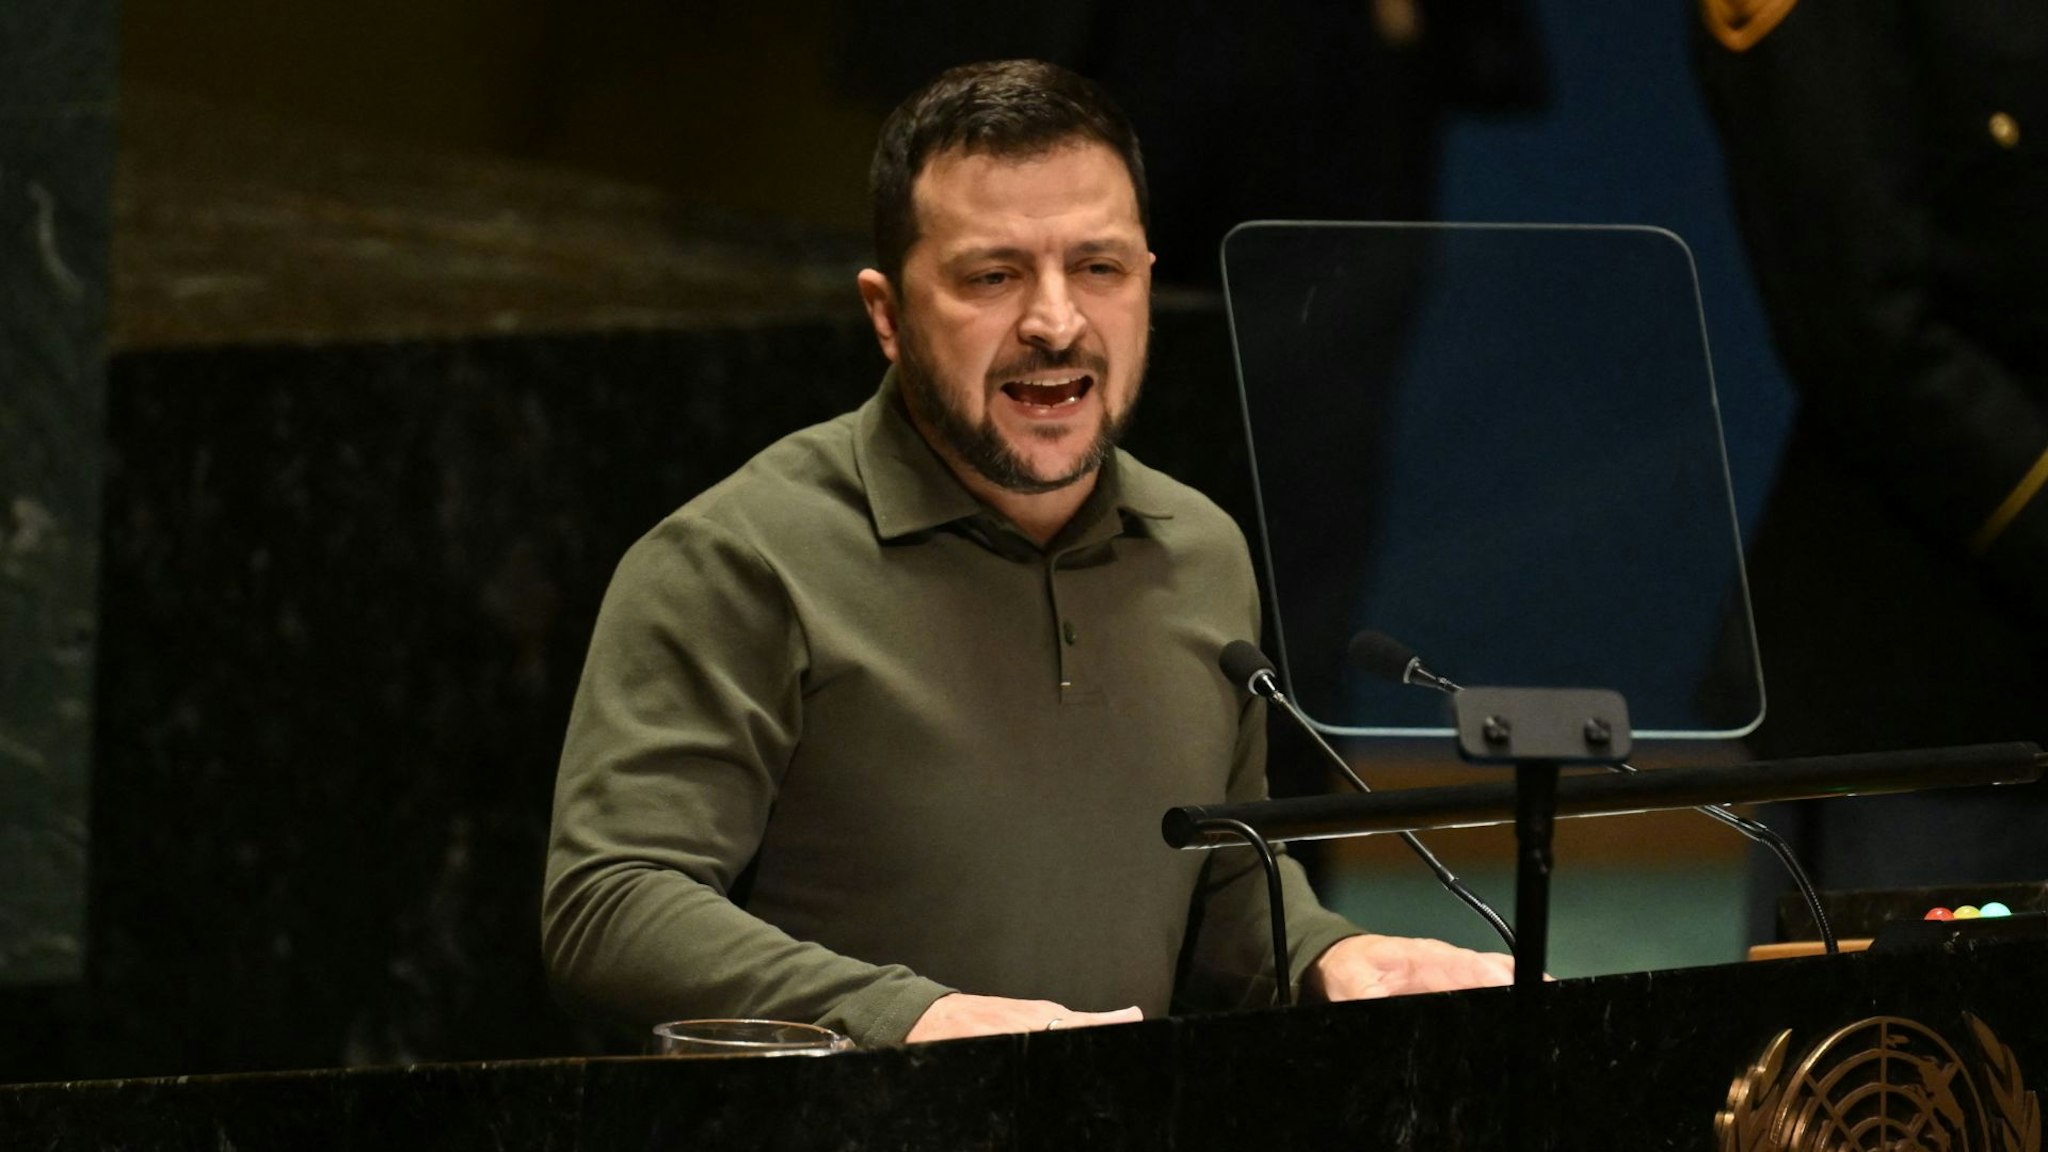 Ukrainian President Volodymyr Zelensky addresses the 78th United Nations General Assembly at UN headquarters in New York City on September 19, 2023.